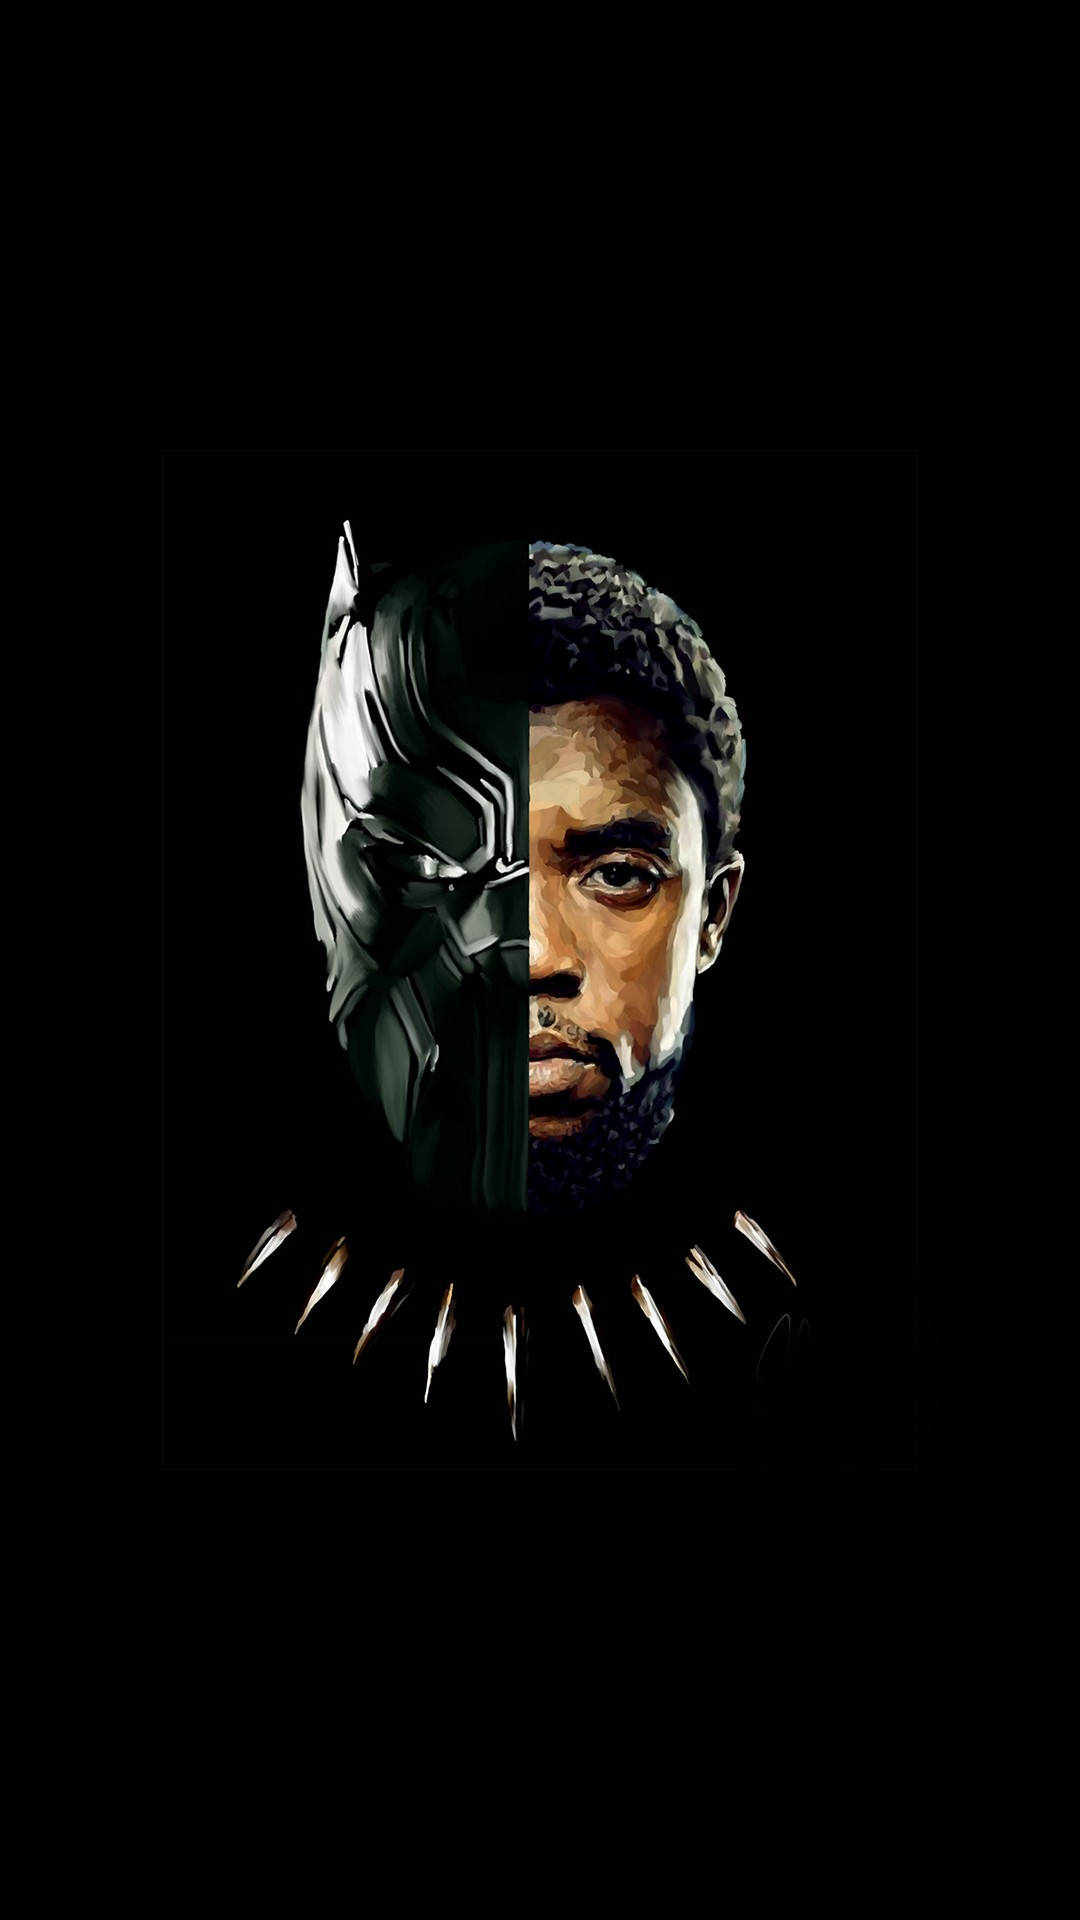 Black Panther T’challa Superhero Iphone Picture